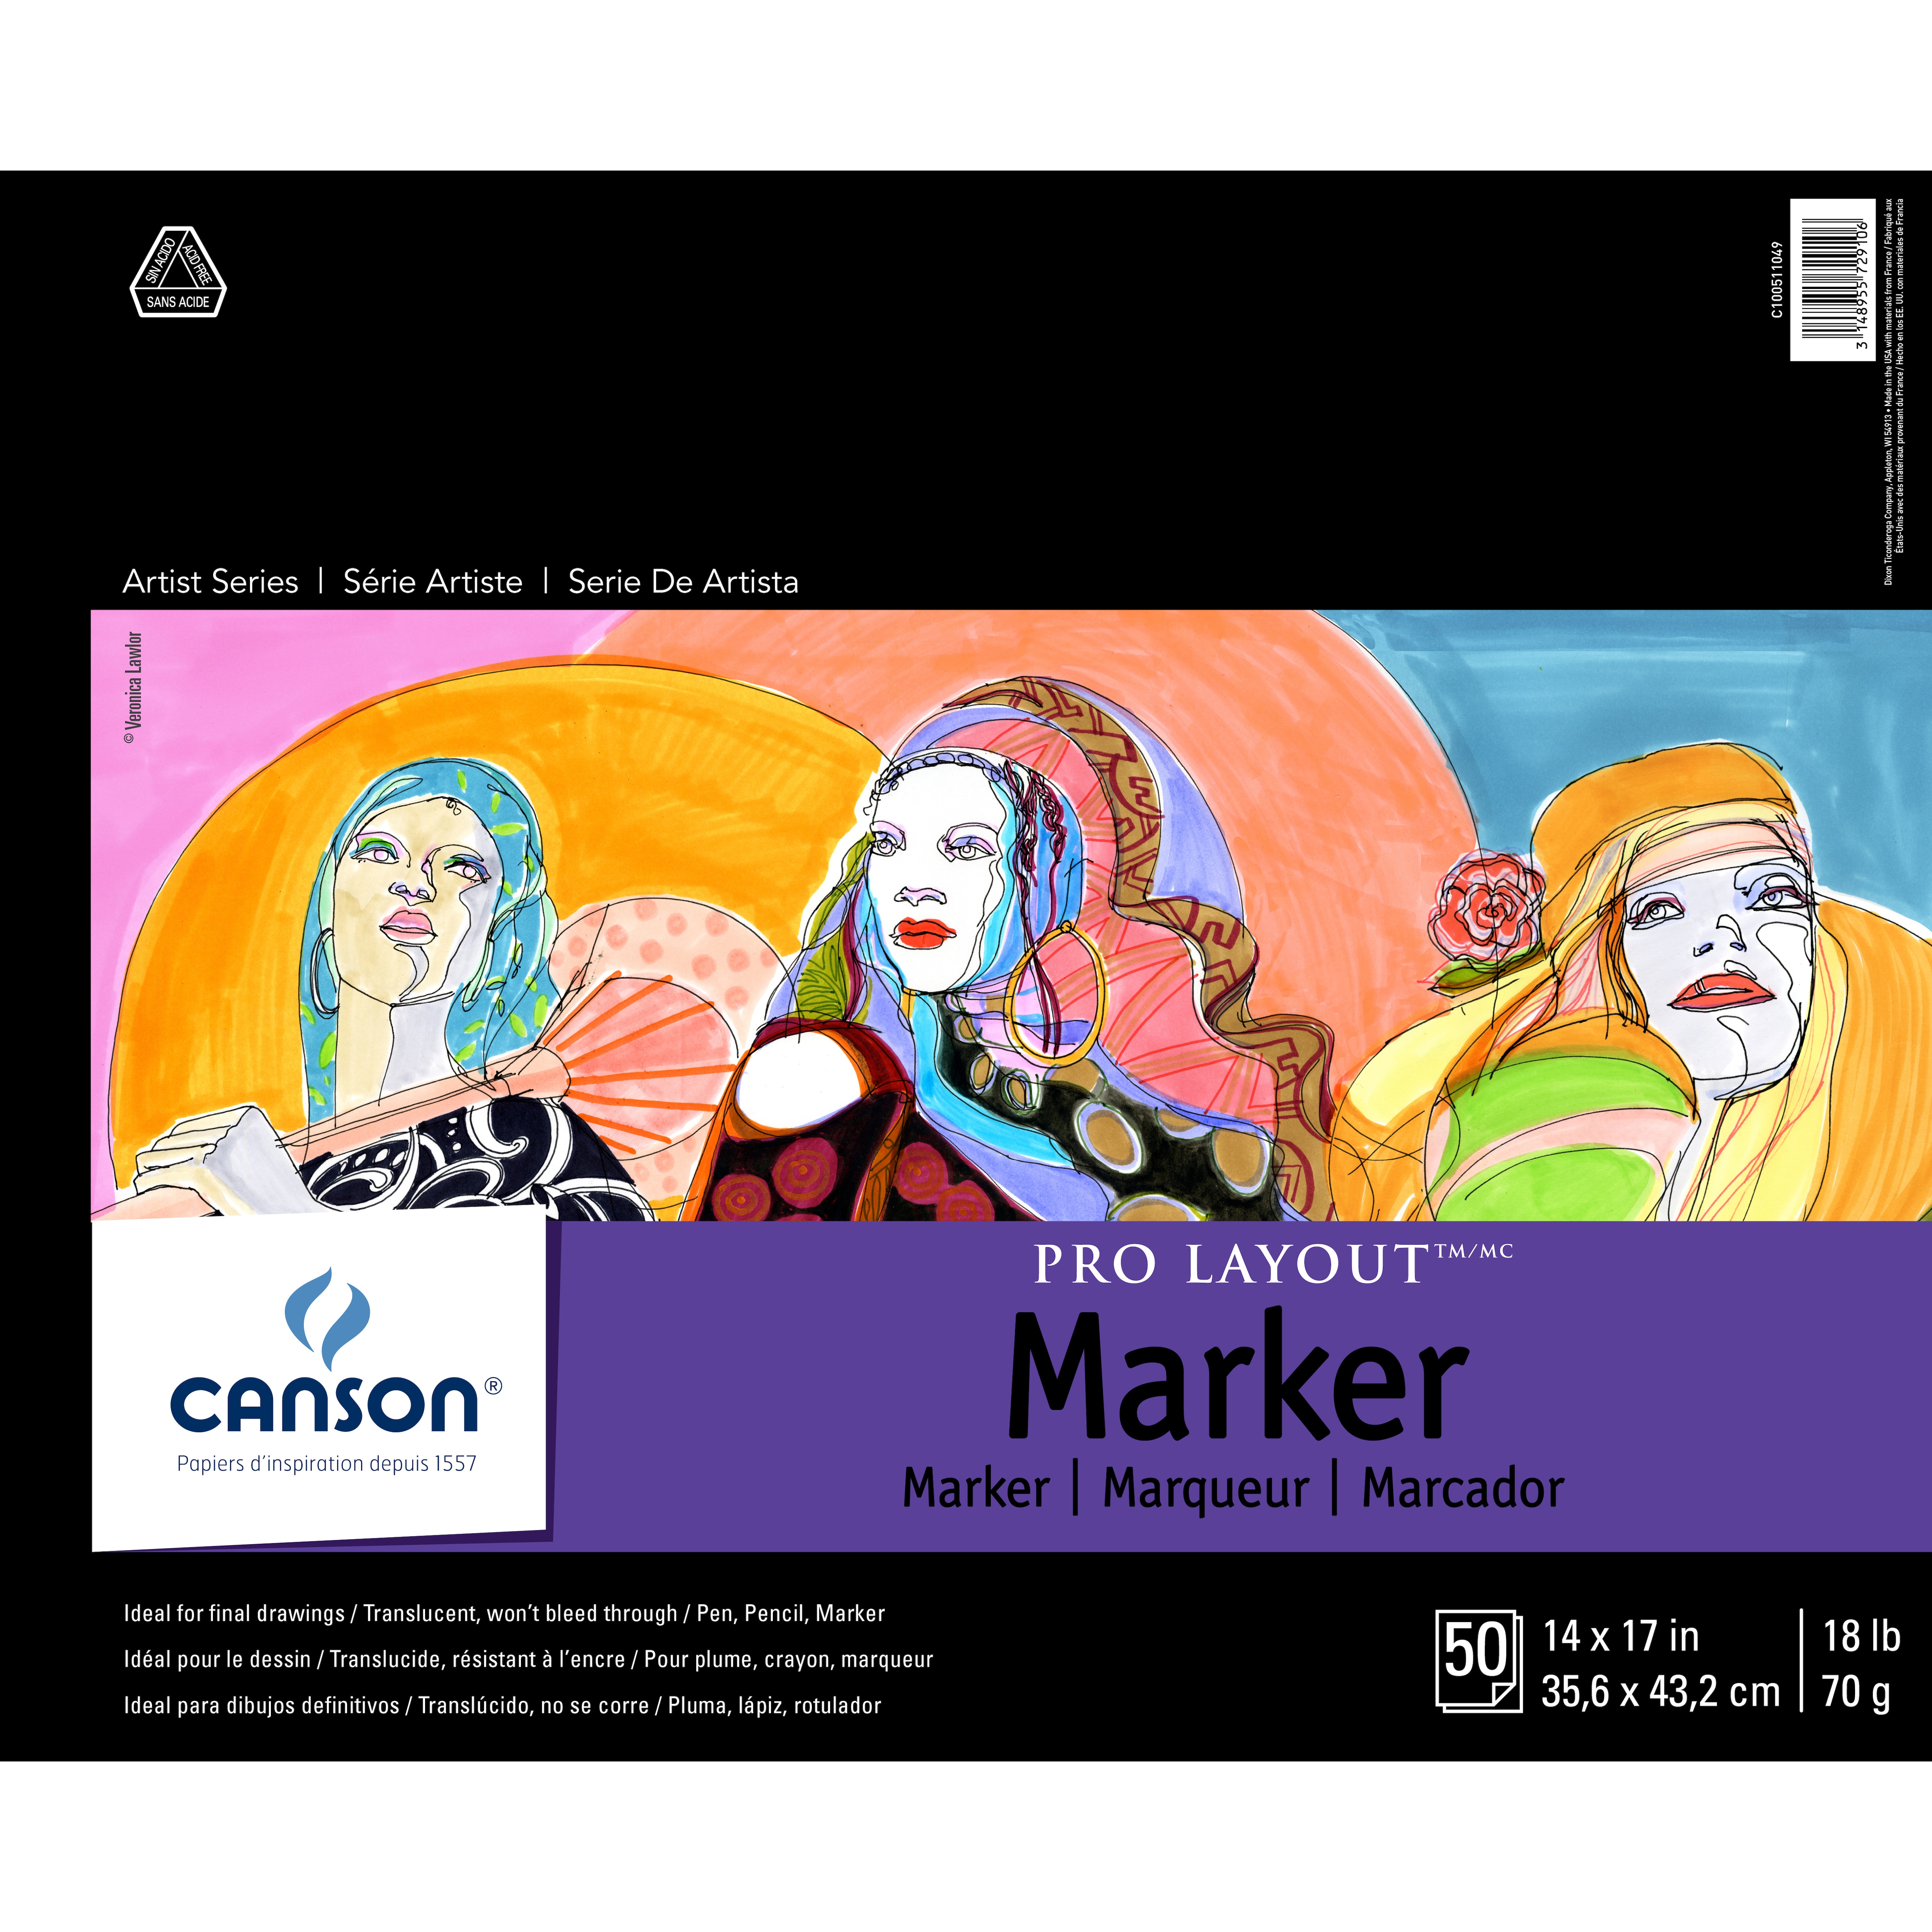 Canson Artist Series Pro-Layout Marker Pad, 14" x 17" 50, Sheets/Pad